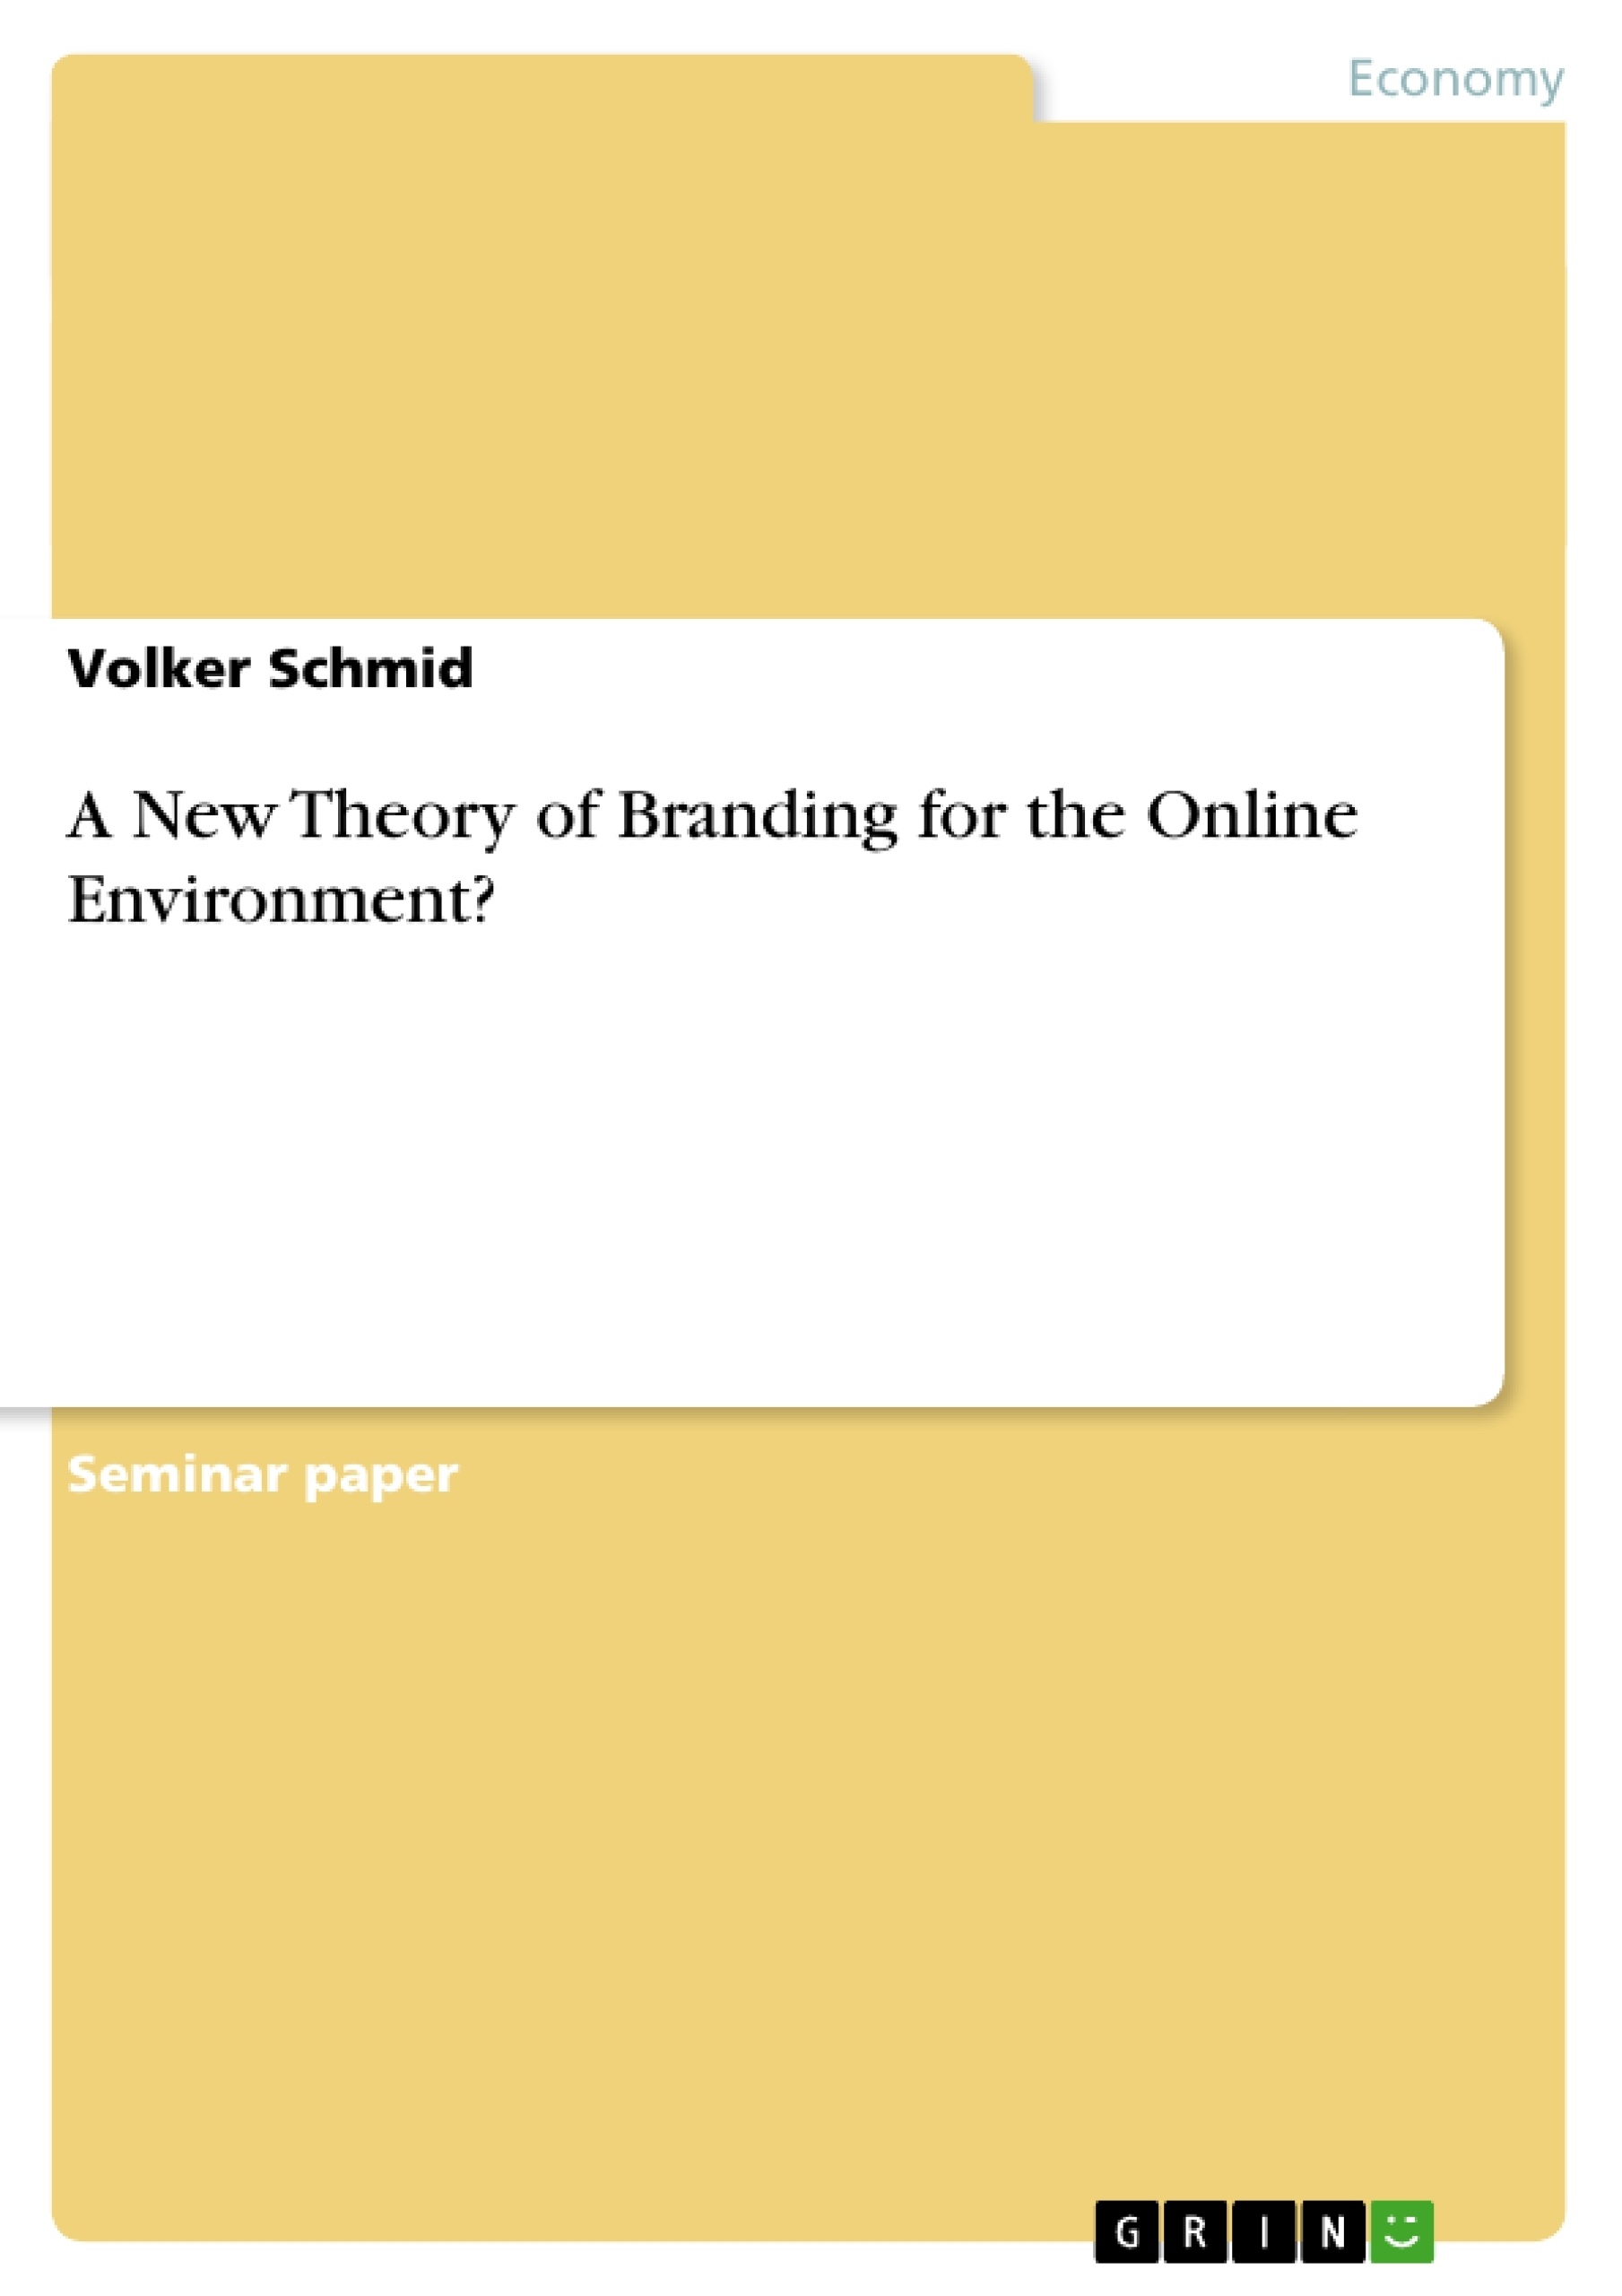 Title: A New Theory of Branding for the Online Environment?